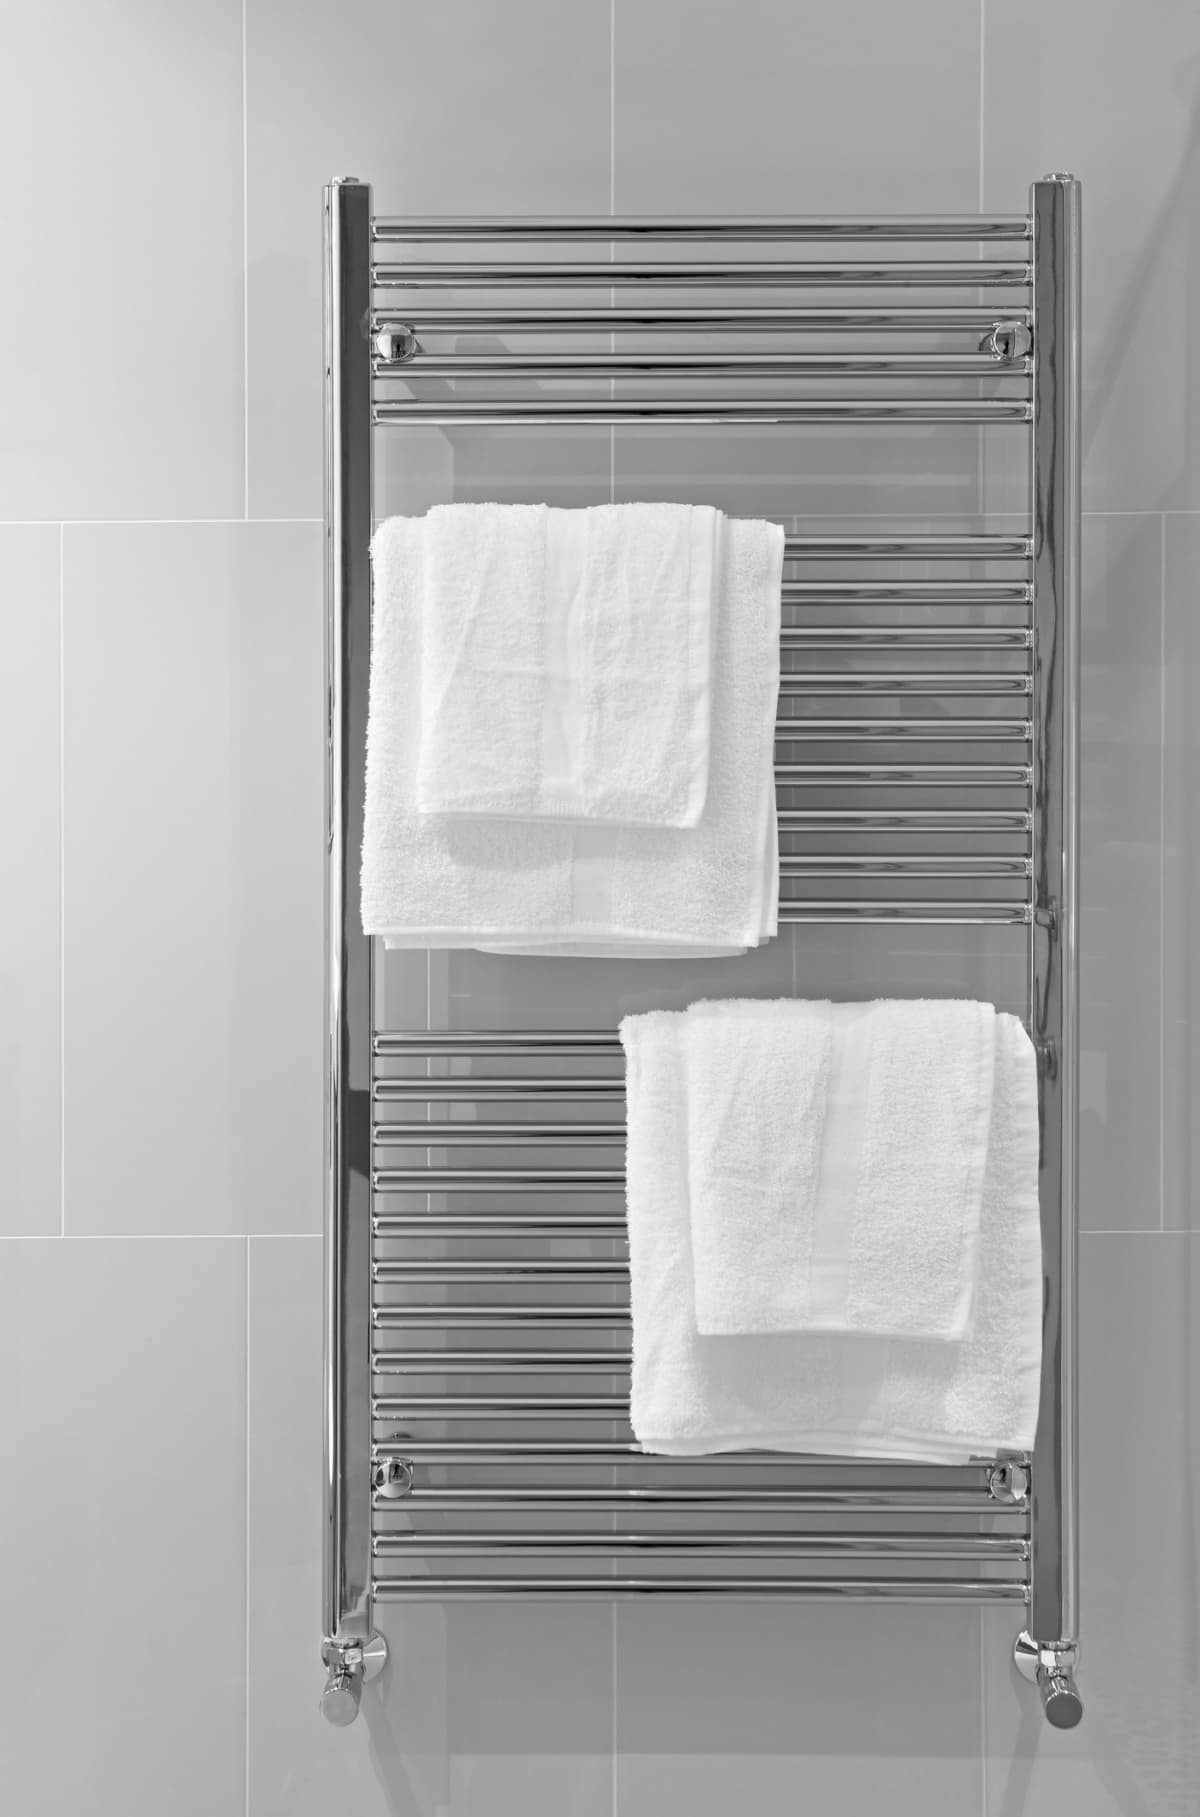 a modern chrome towel rail mounted against a tiled wall with two sets of white cotton towels. Rendered in black and white with contrast pushed slightly for effect.Looking for a Bathroom image Then please see my other Bathrooms and related inages by clicking on the Lightbox link below...A>AA>A